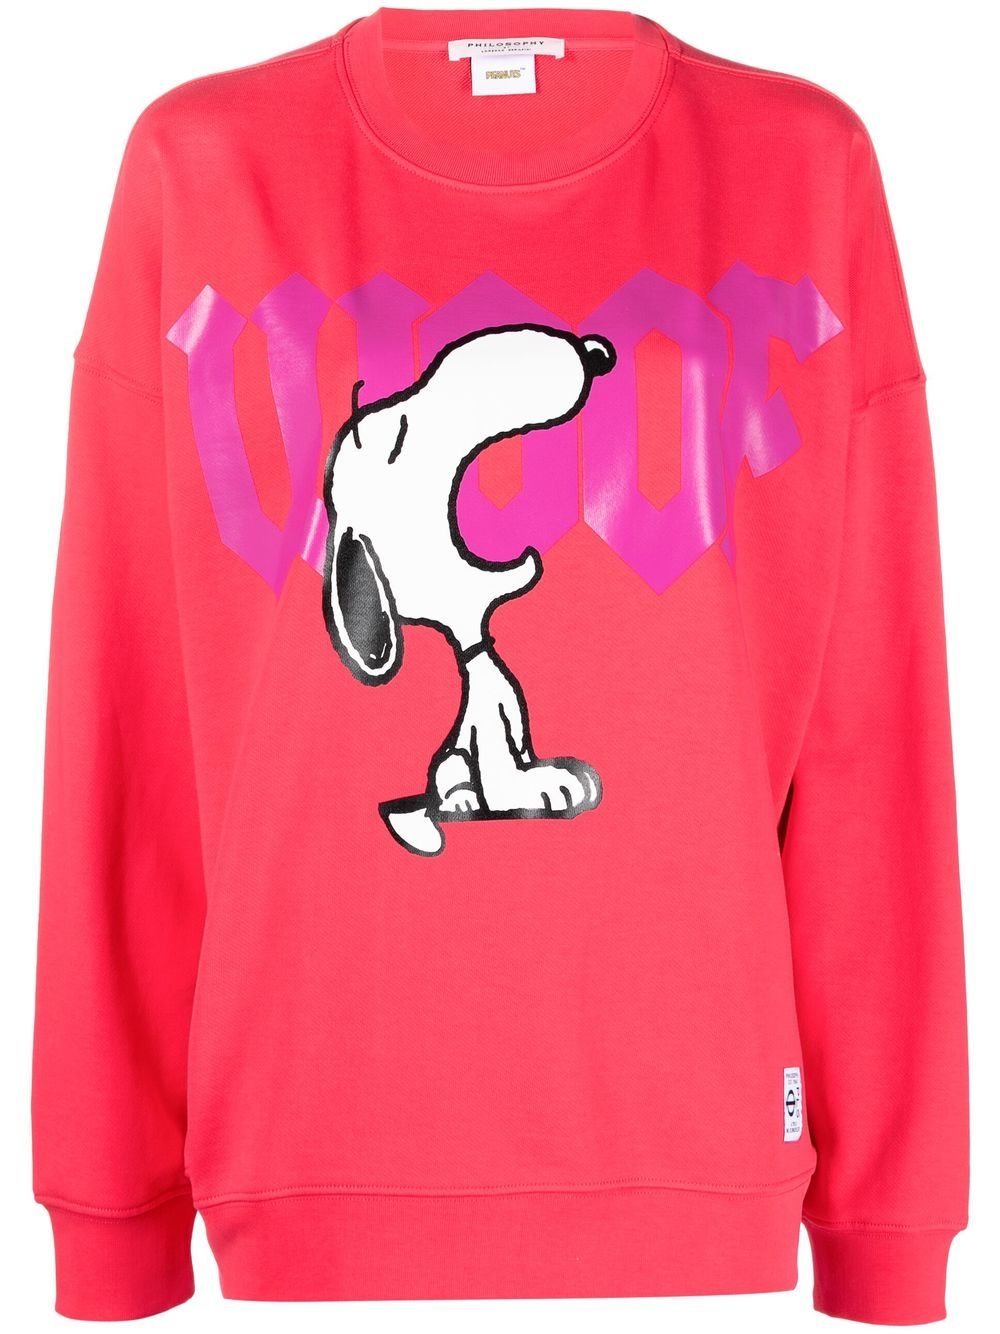 Louis vuitton snoopy pinky unisex hoodie outfit for men women